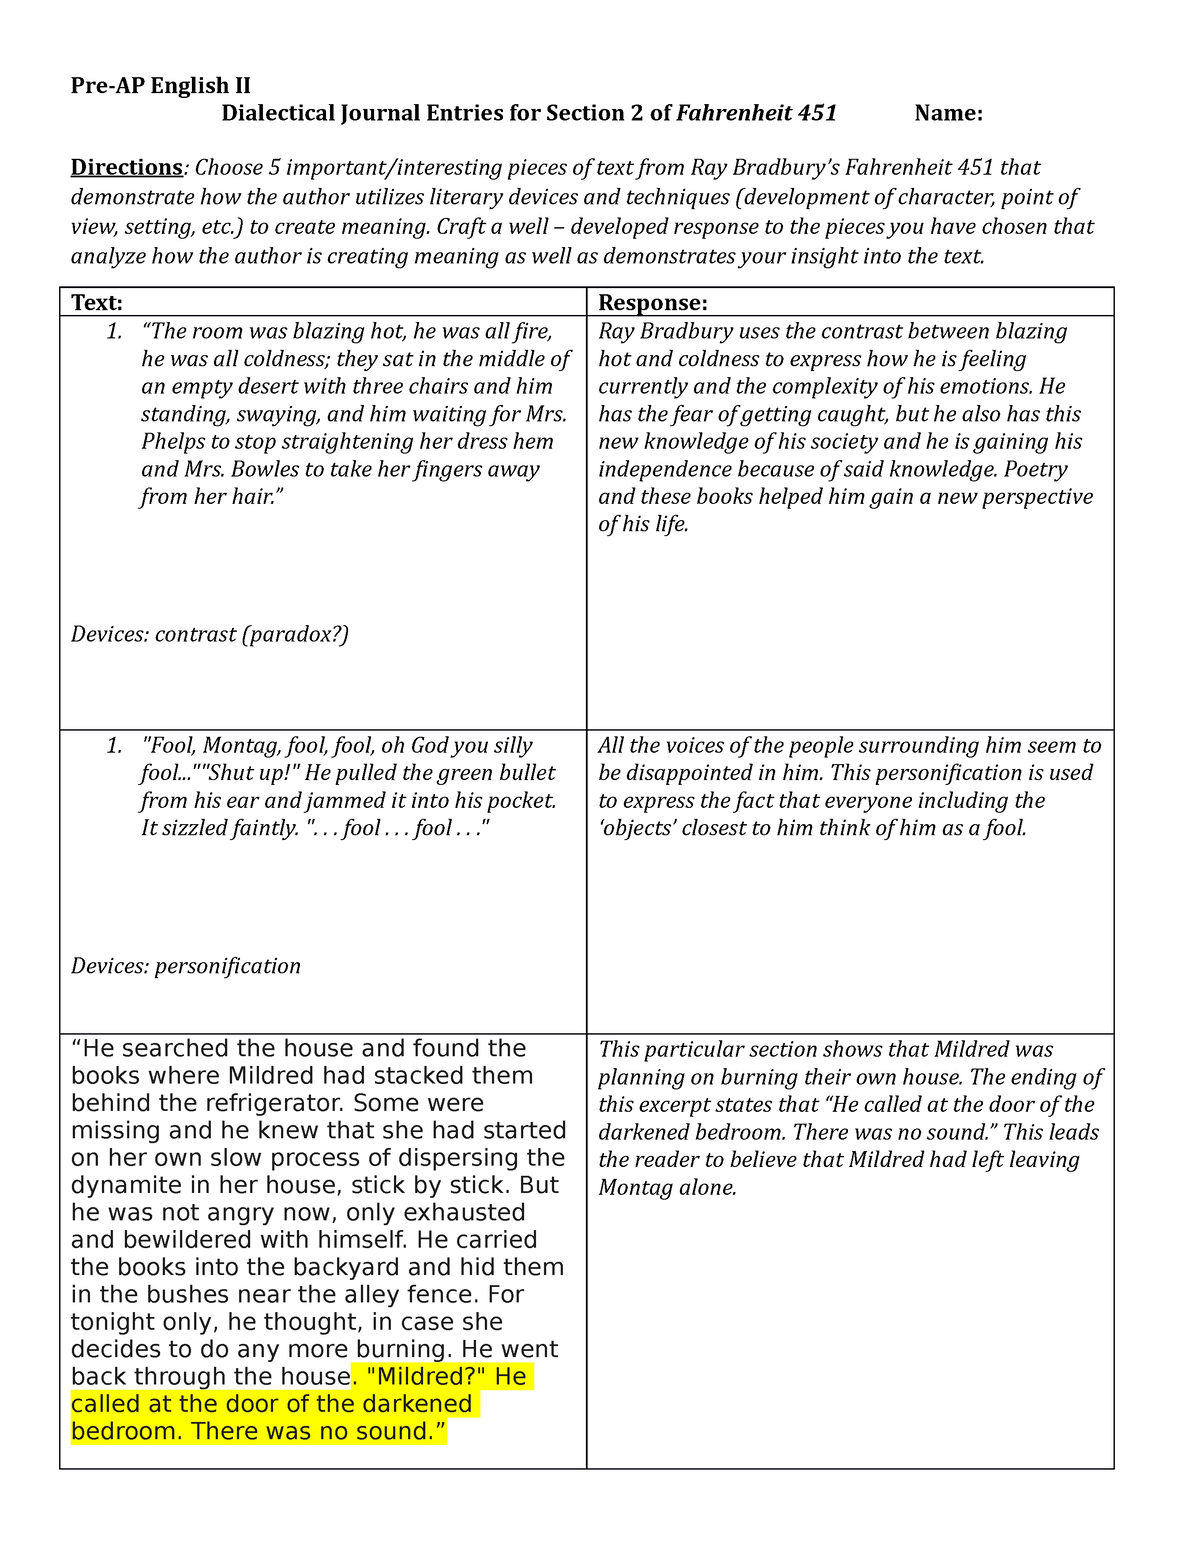 dialectical-journal-entries-for-section-2-of-faherenheit-451-pre-ap